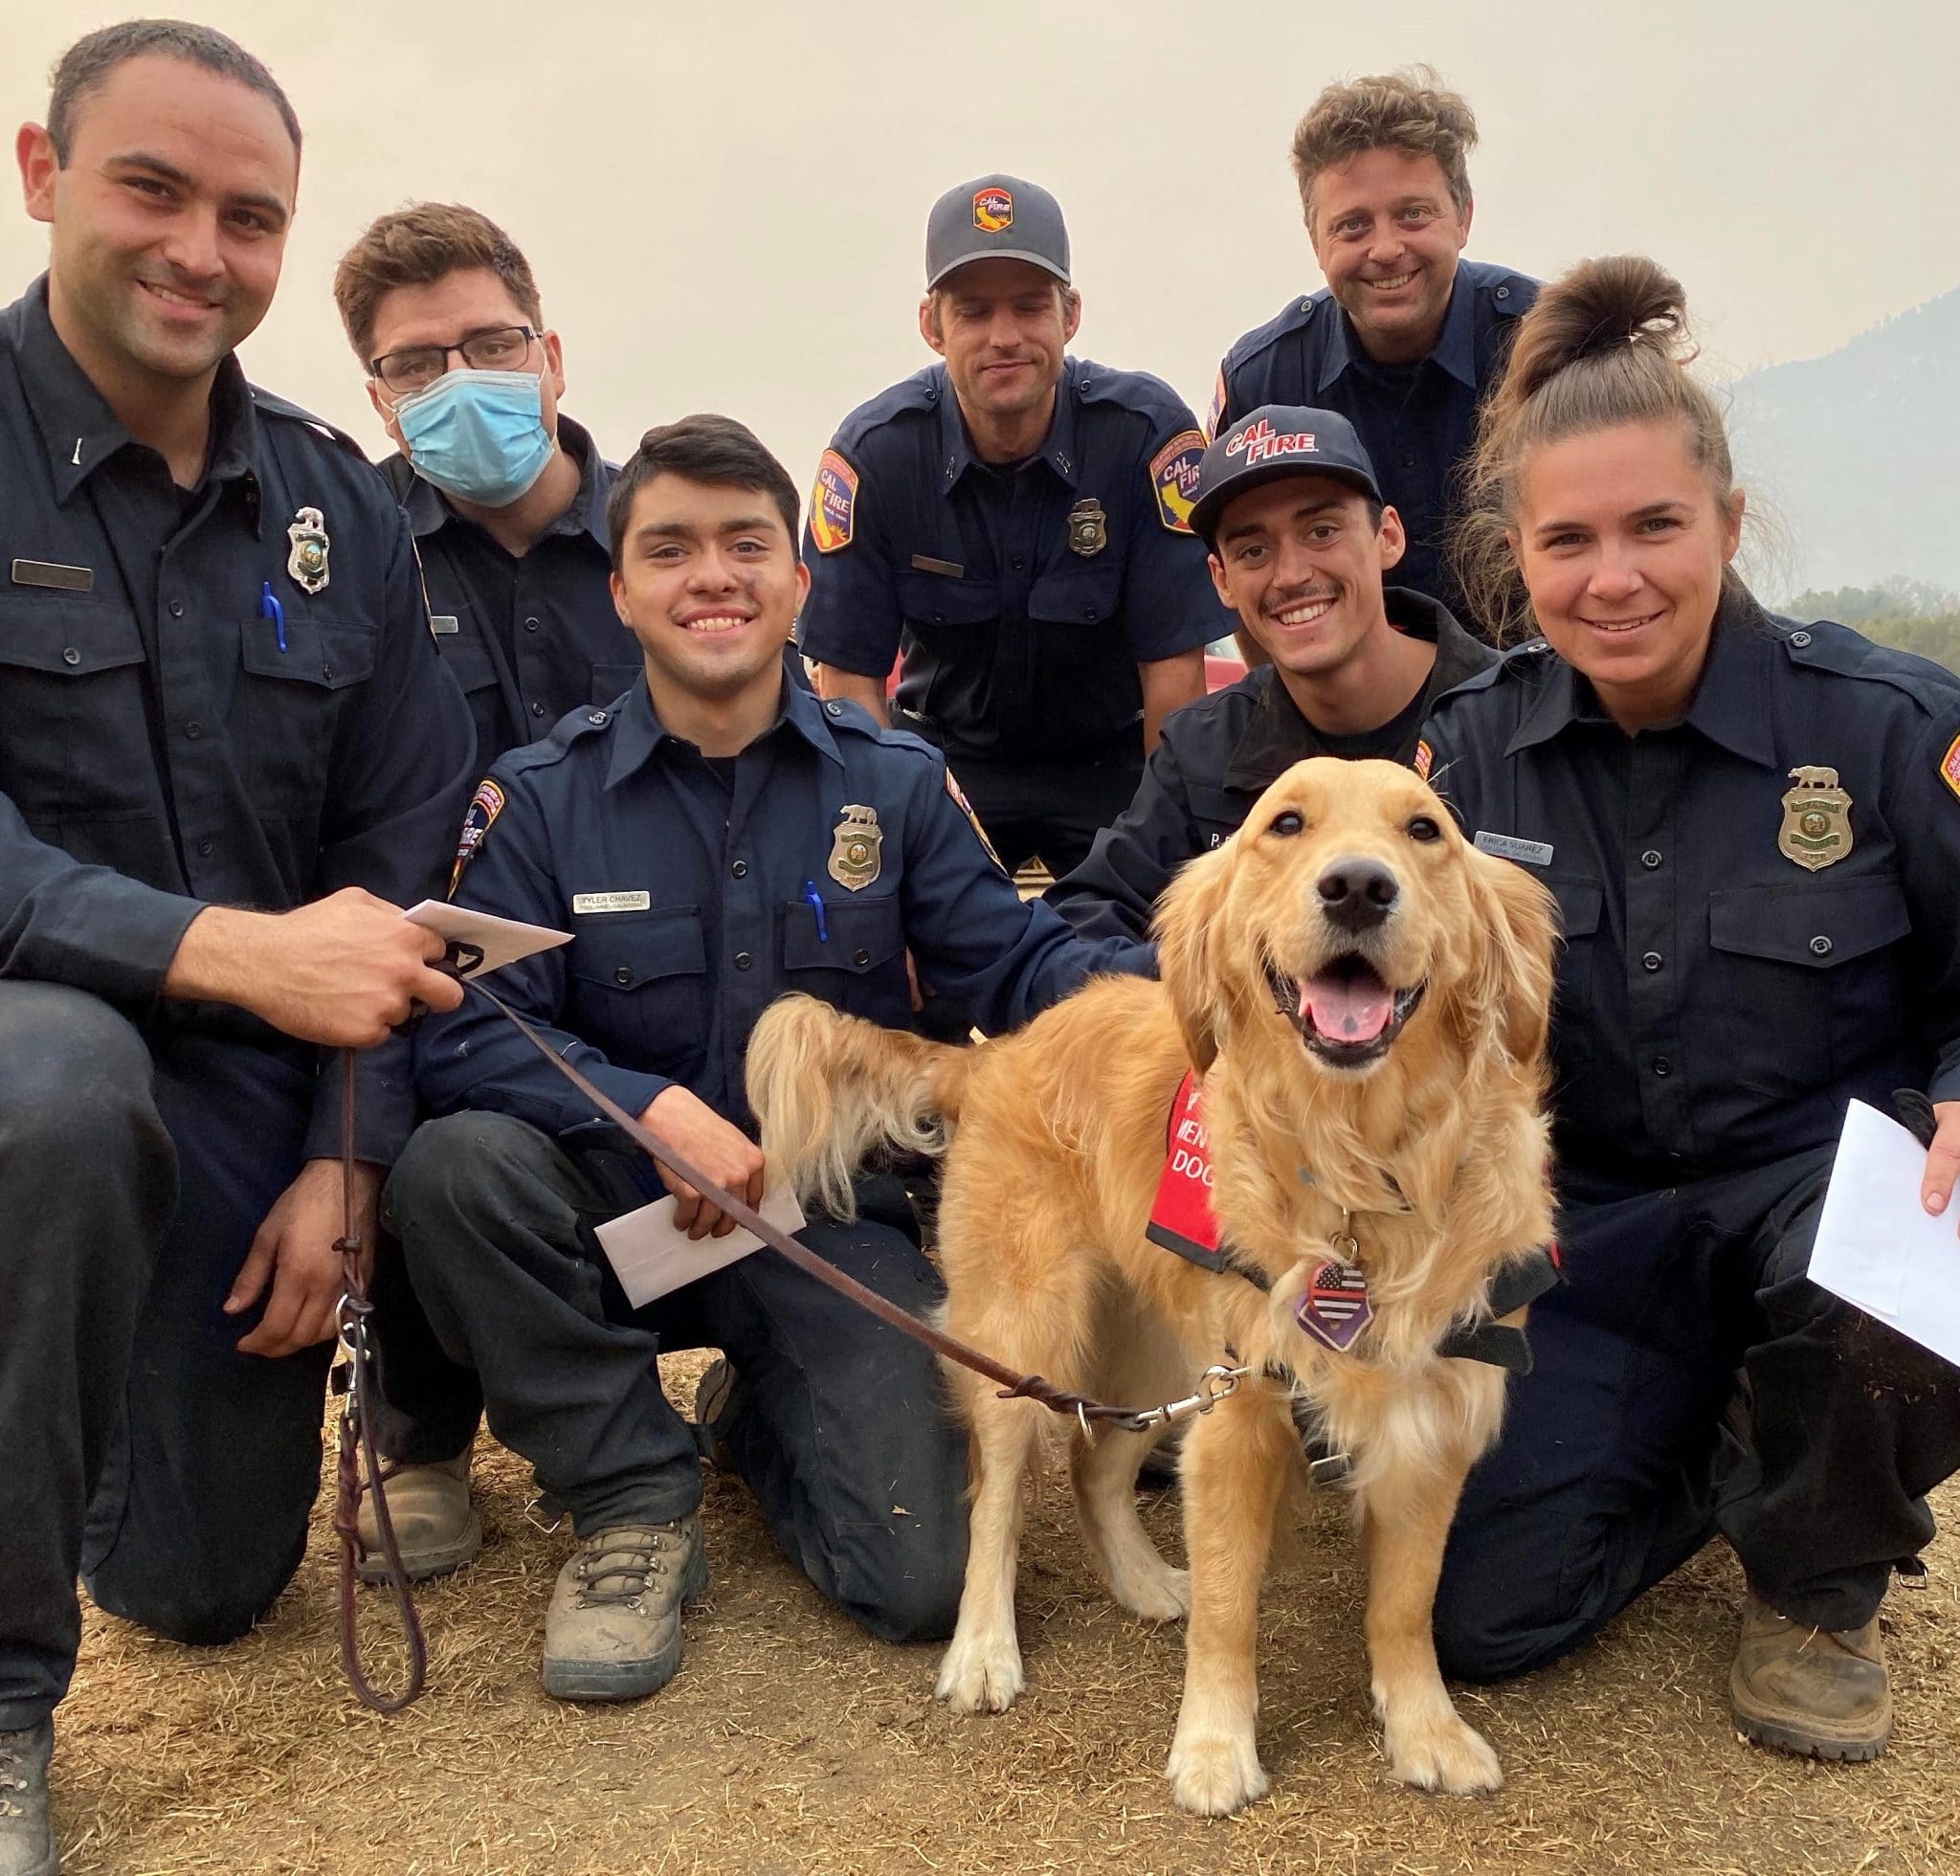 Sweet Therapy Dog Offers Much-Needed Relief to Firefighters Battling West  Coast Fires | The Dog People by Rover.com